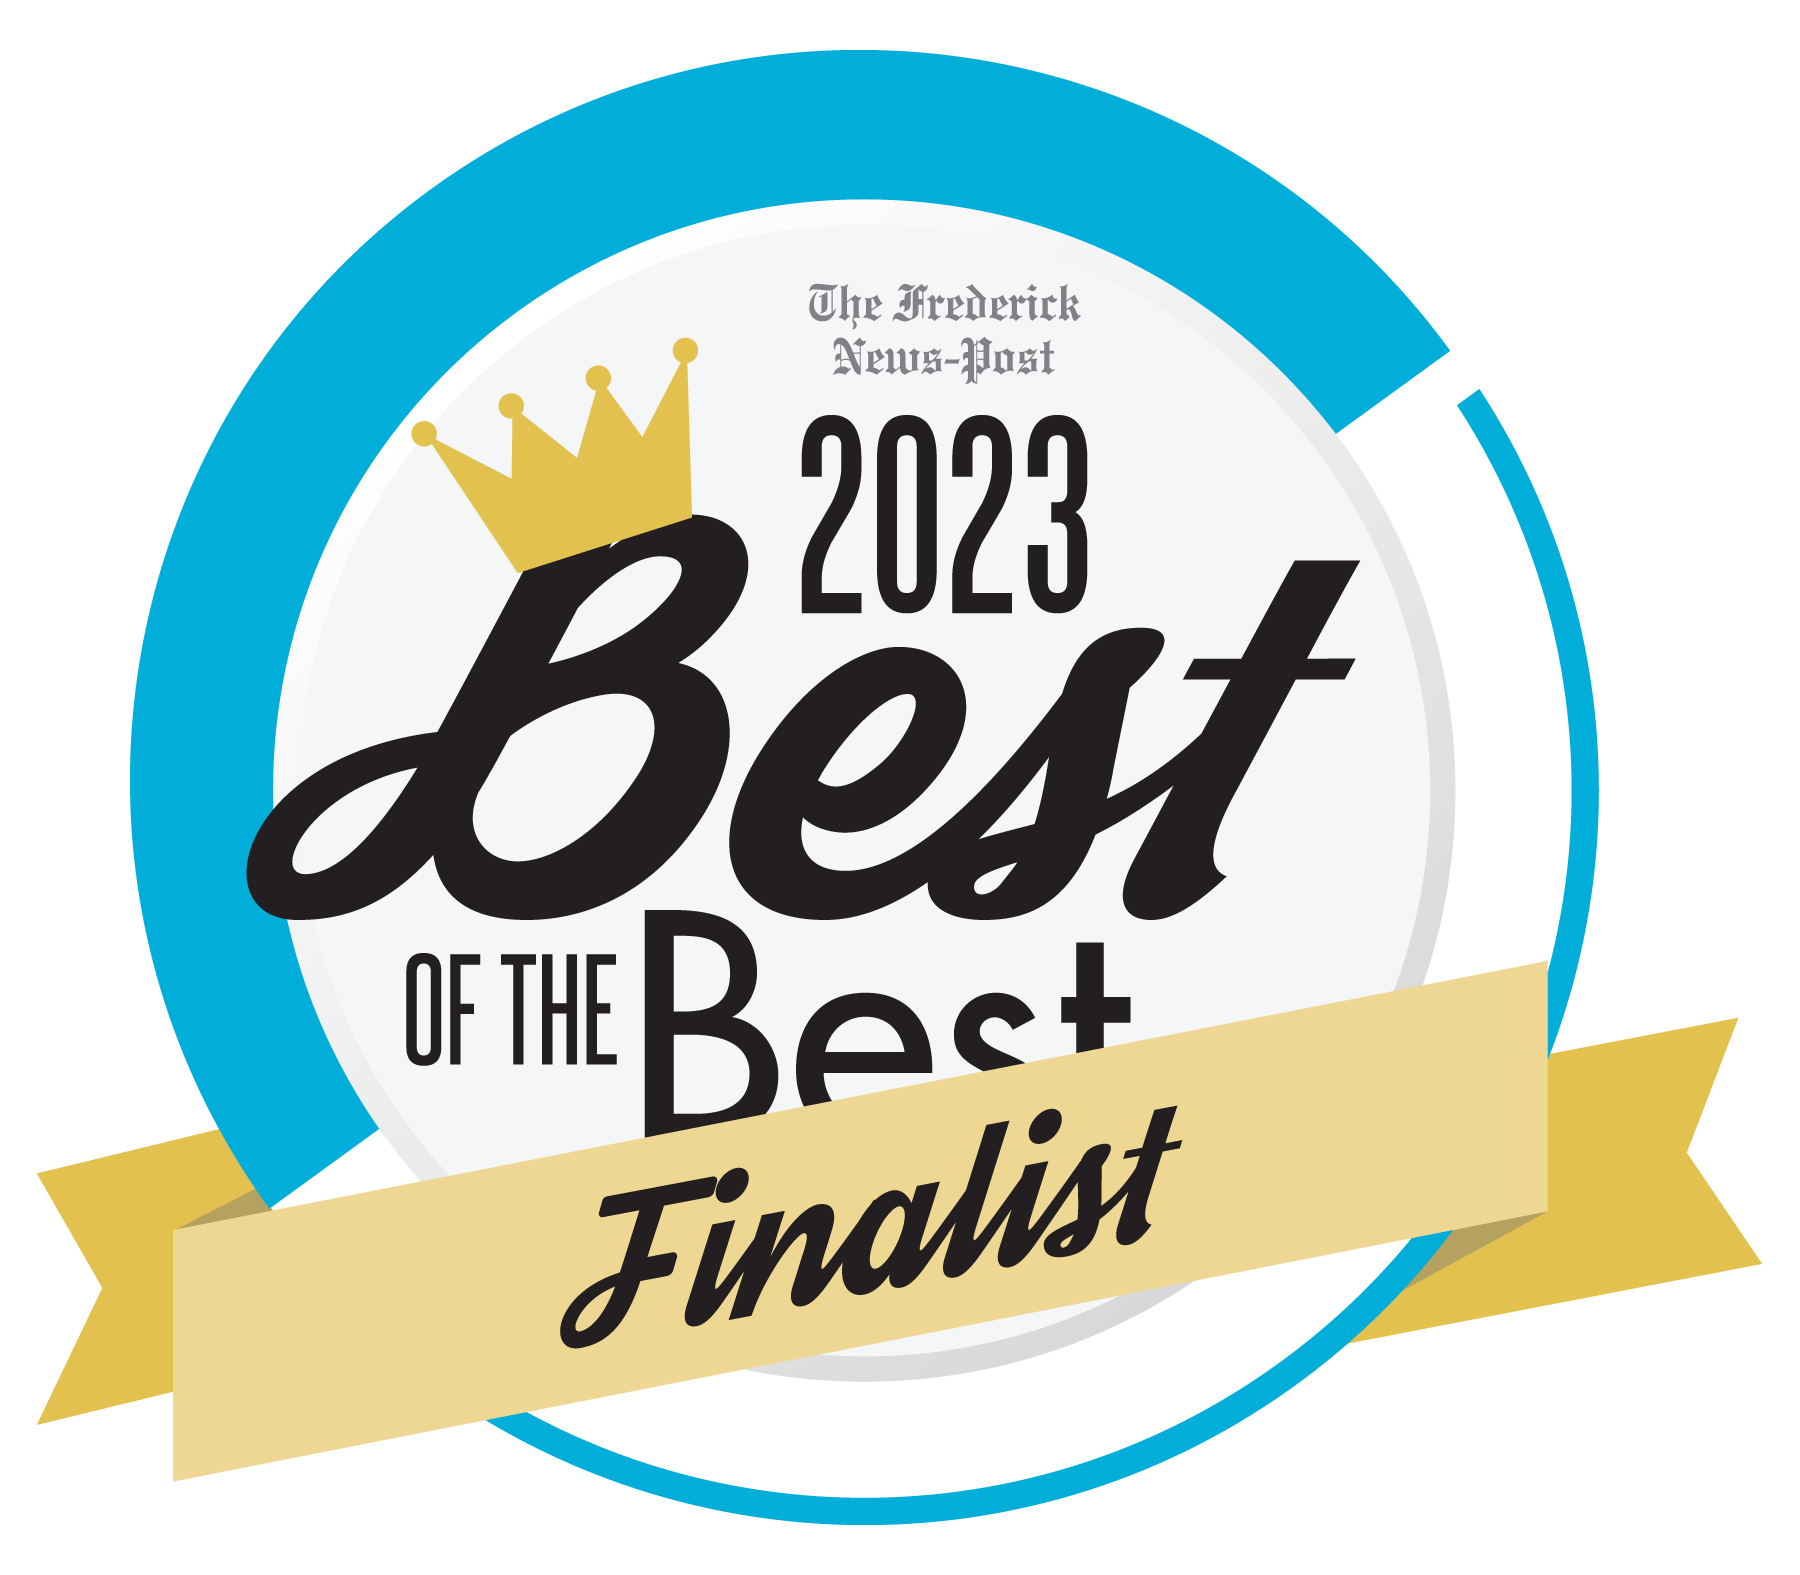 The Frederick News-Post 2023 Best of the Best Finalist